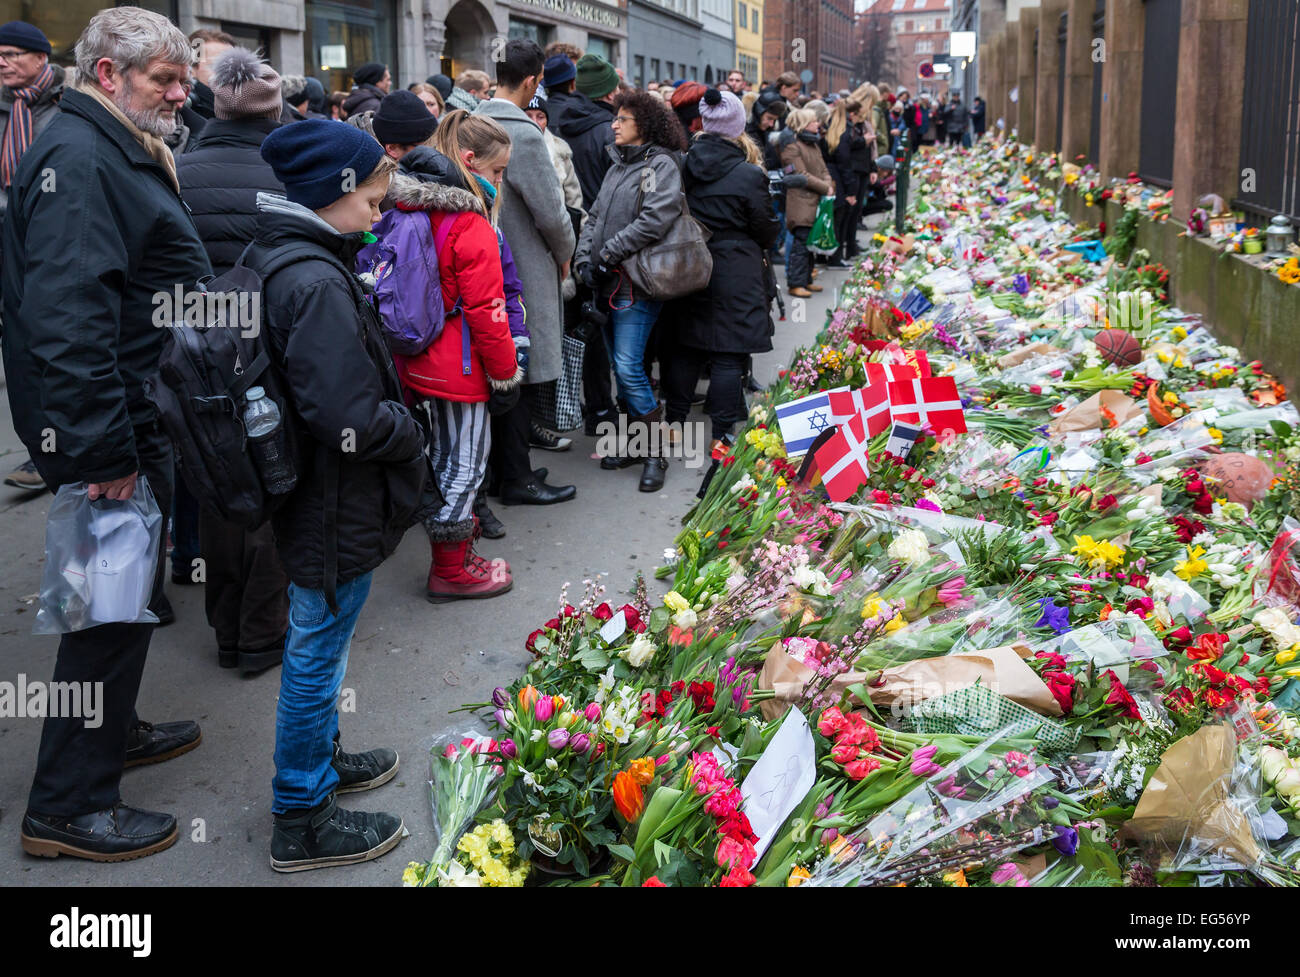 People laying flowers to commemorate for the man killed at Copenhagen's main synagogue during the terrorist attack on 15 February 2015, Denmark Stock Photo